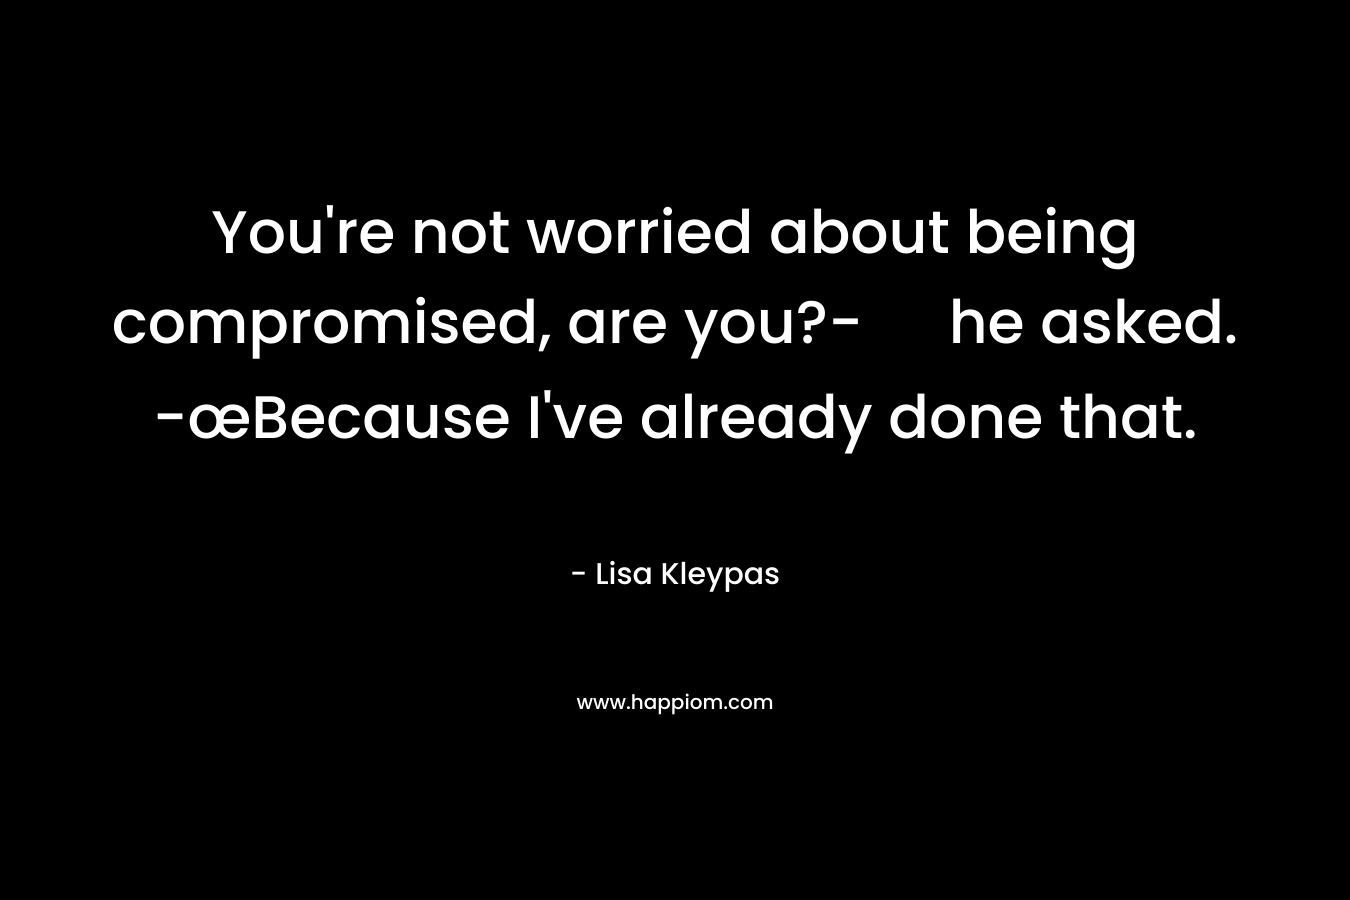 You're not worried about being compromised, are you?- he asked. -œBecause I've already done that.